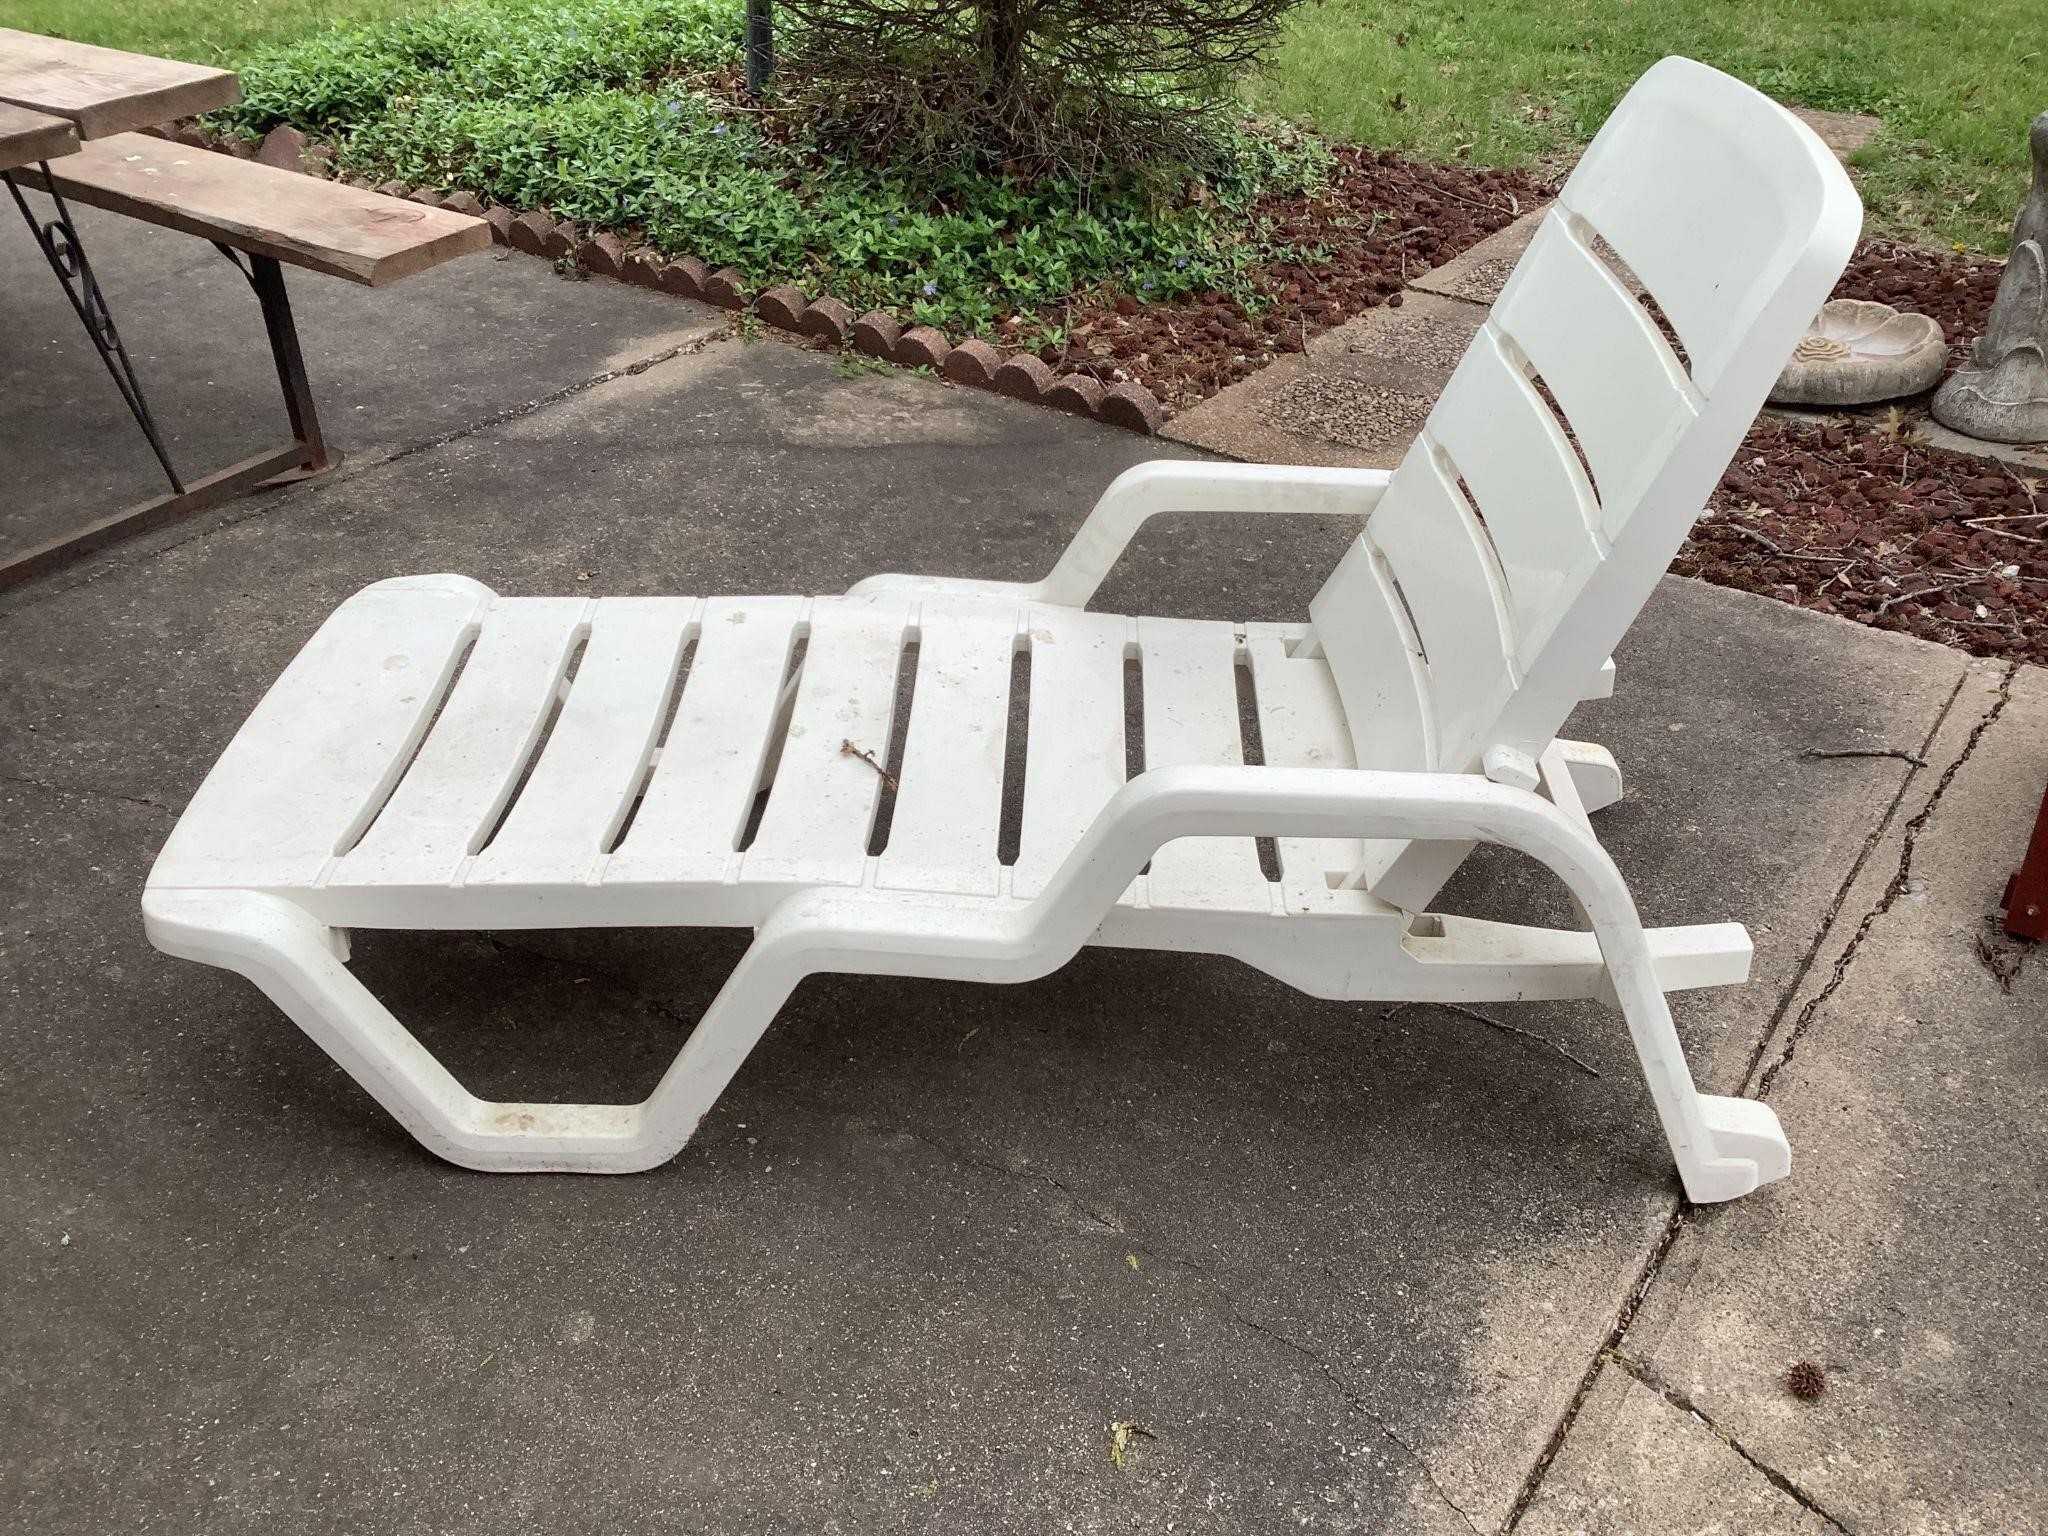 White Chaise Longer outdoor chair